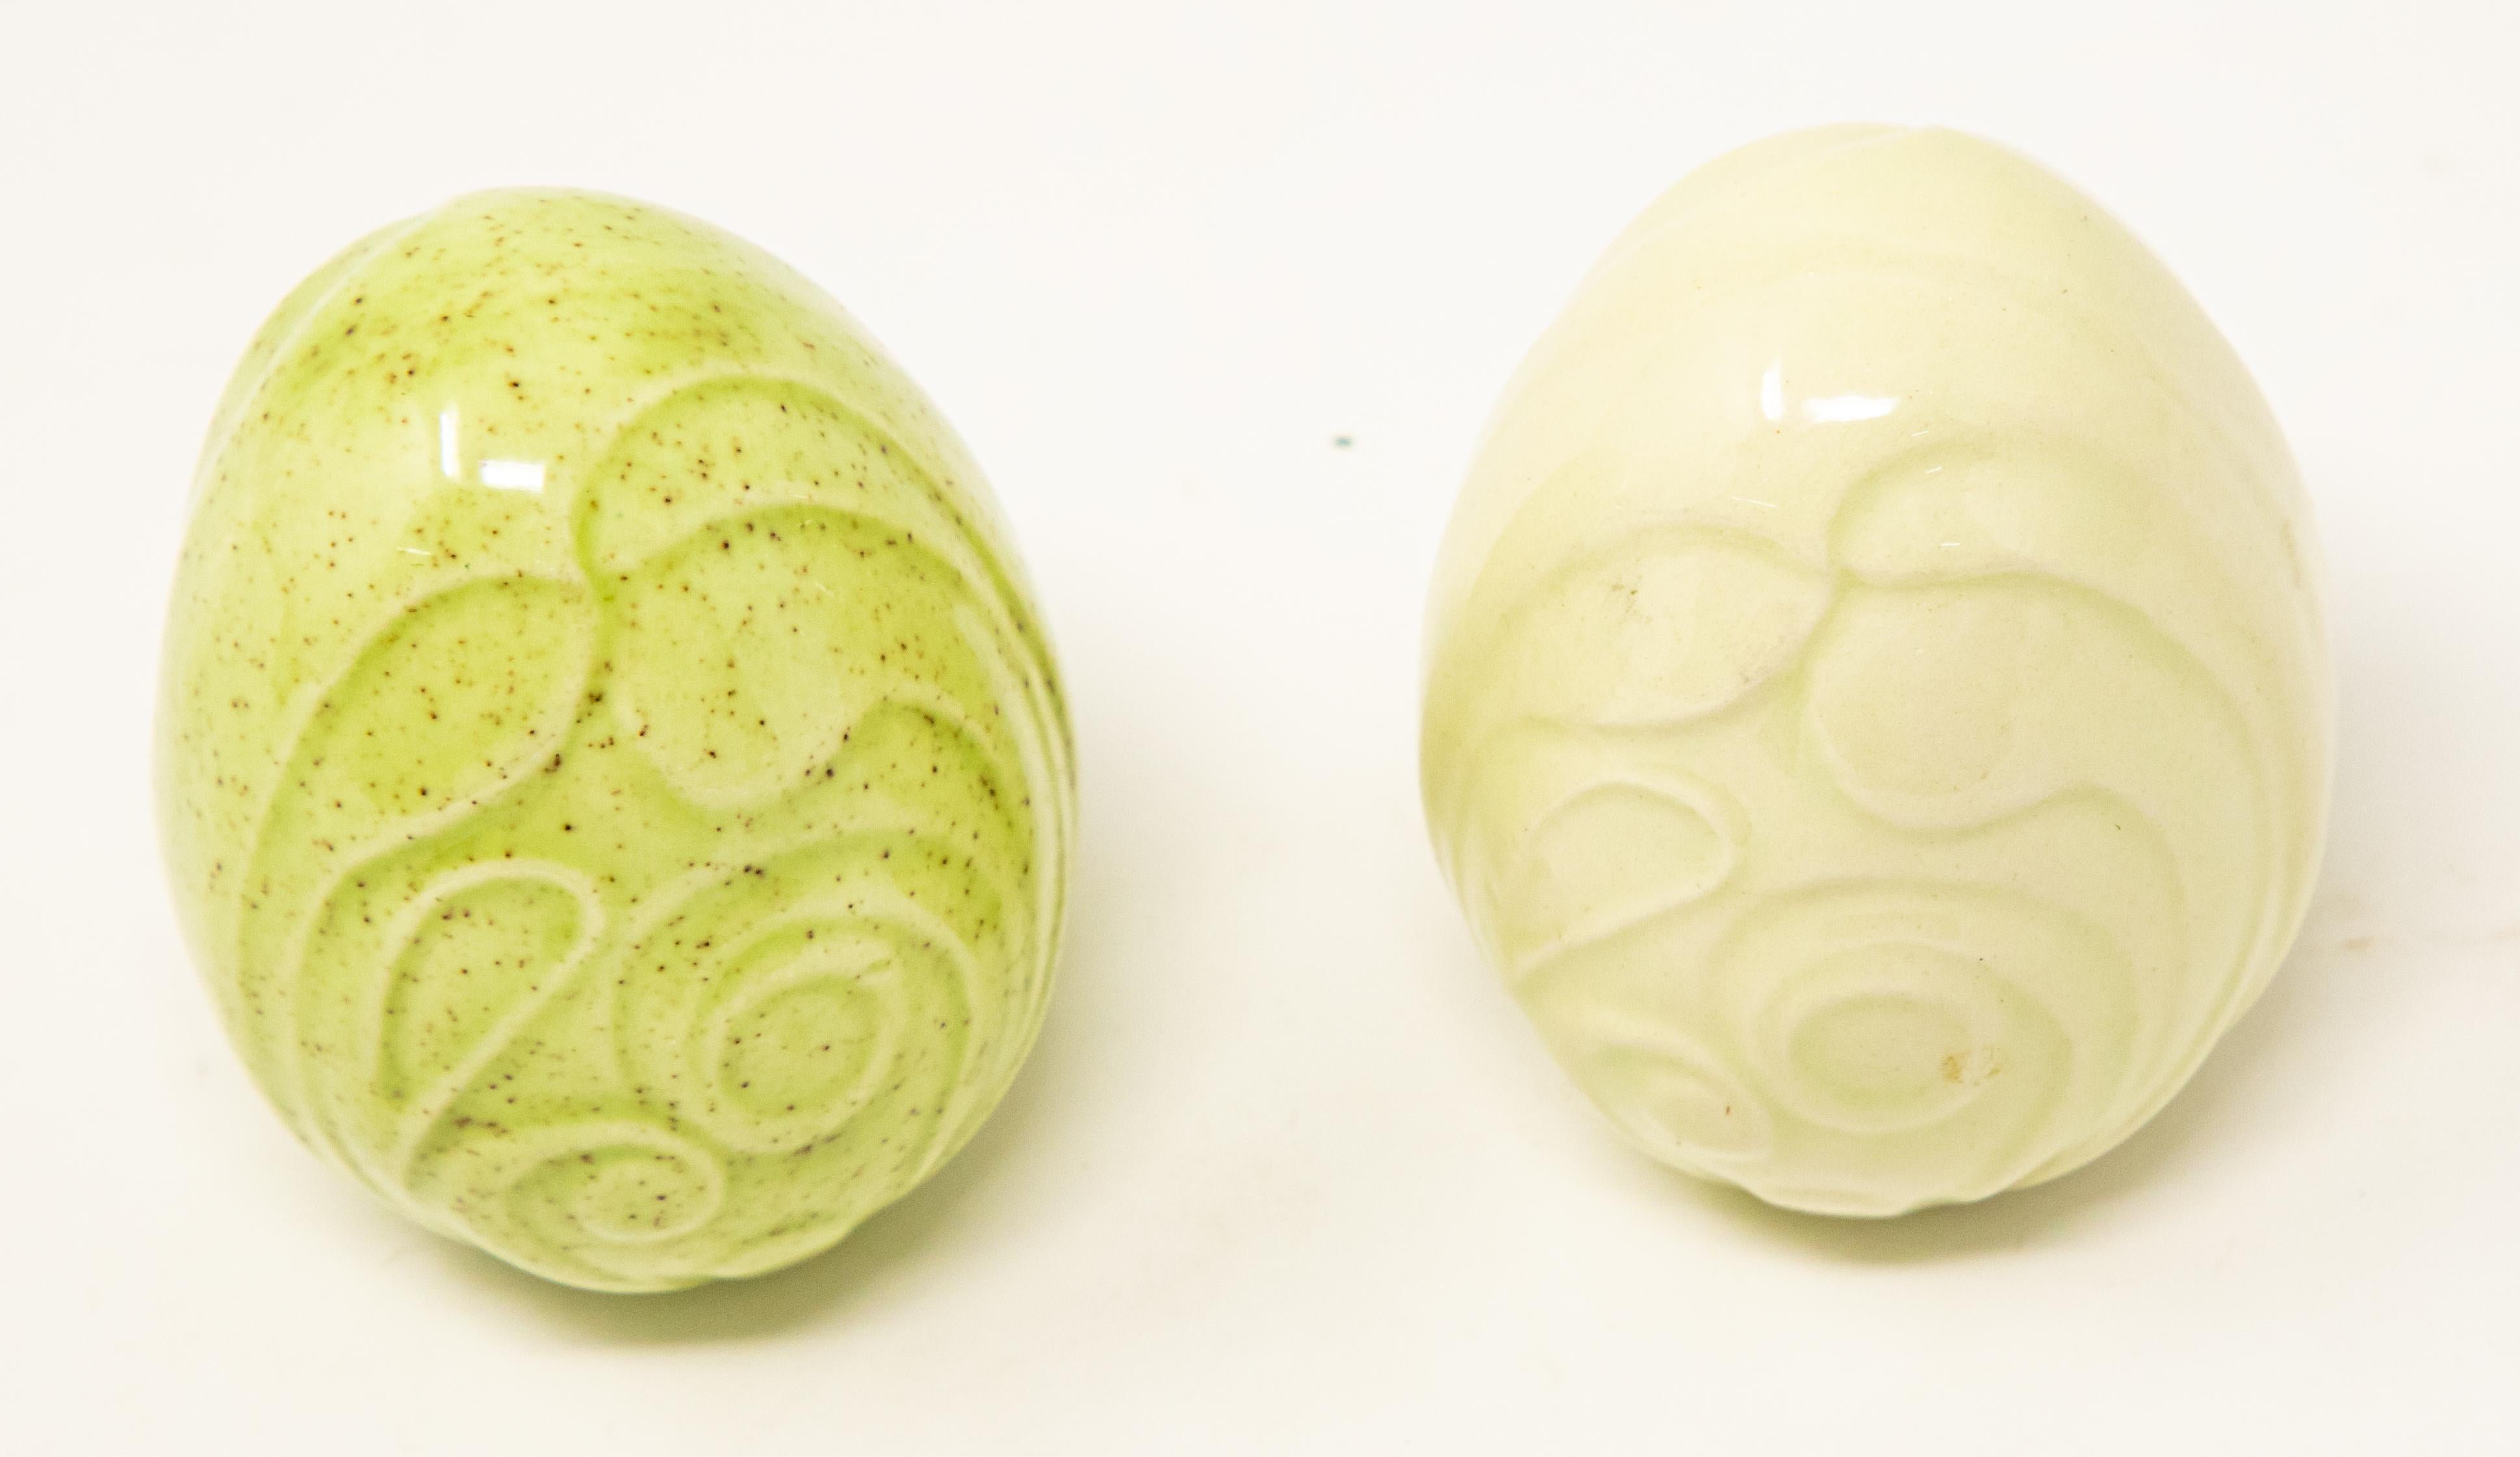 Offering a pair of ceramic glazed eggs. One is green with speckles and a swirled pattern. The other is solid cream with the same swirled pattern.